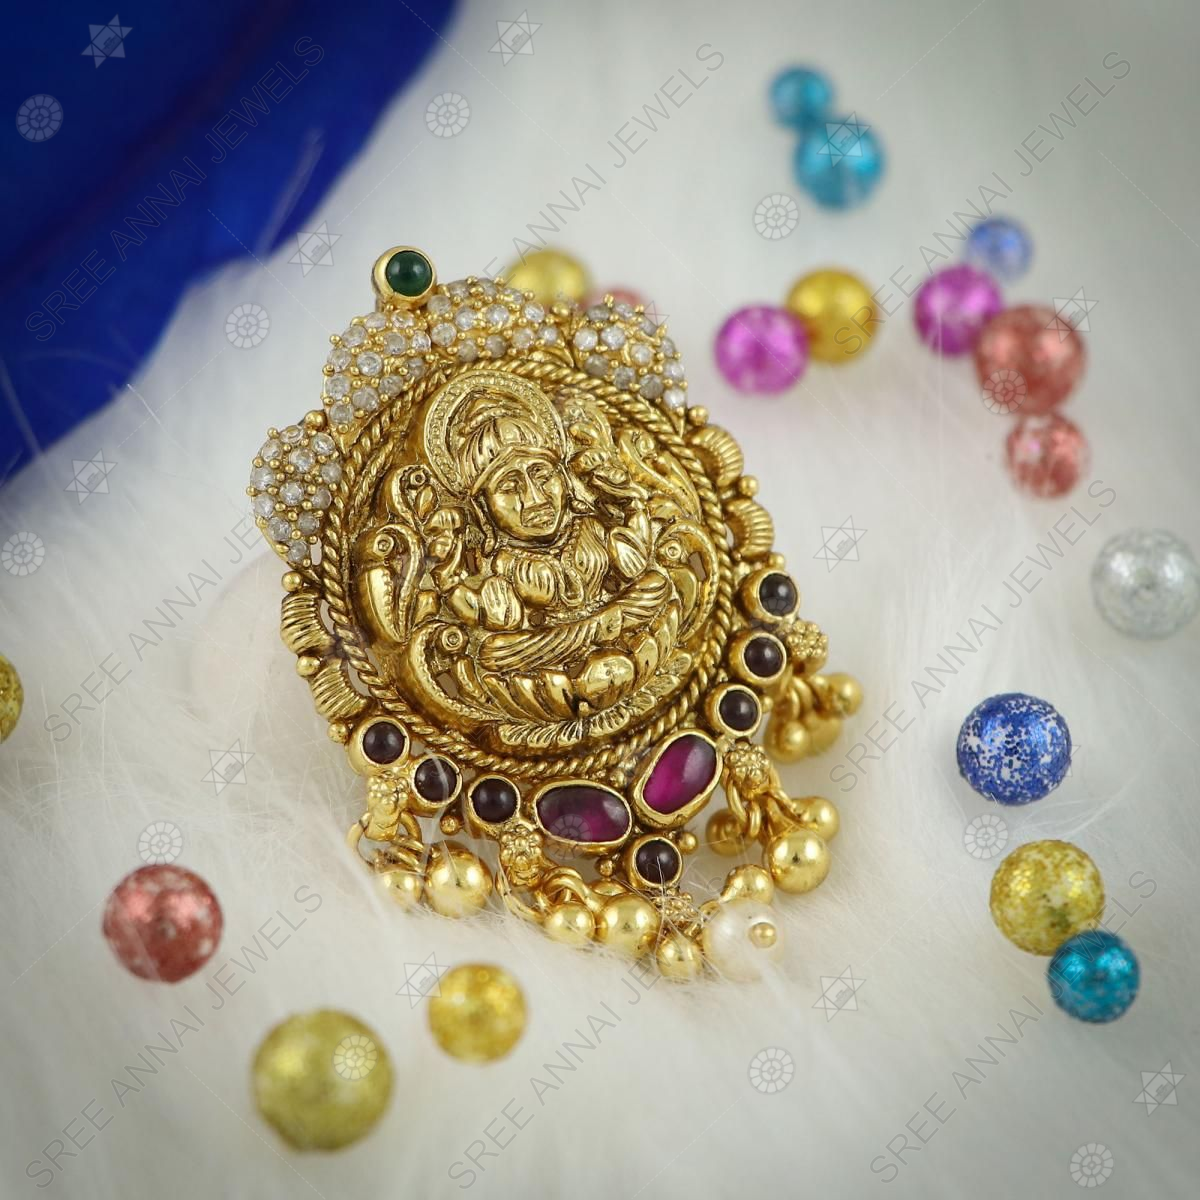 High Quality Gold Plated Lakshmi Design Motifs With Hanging Pearl